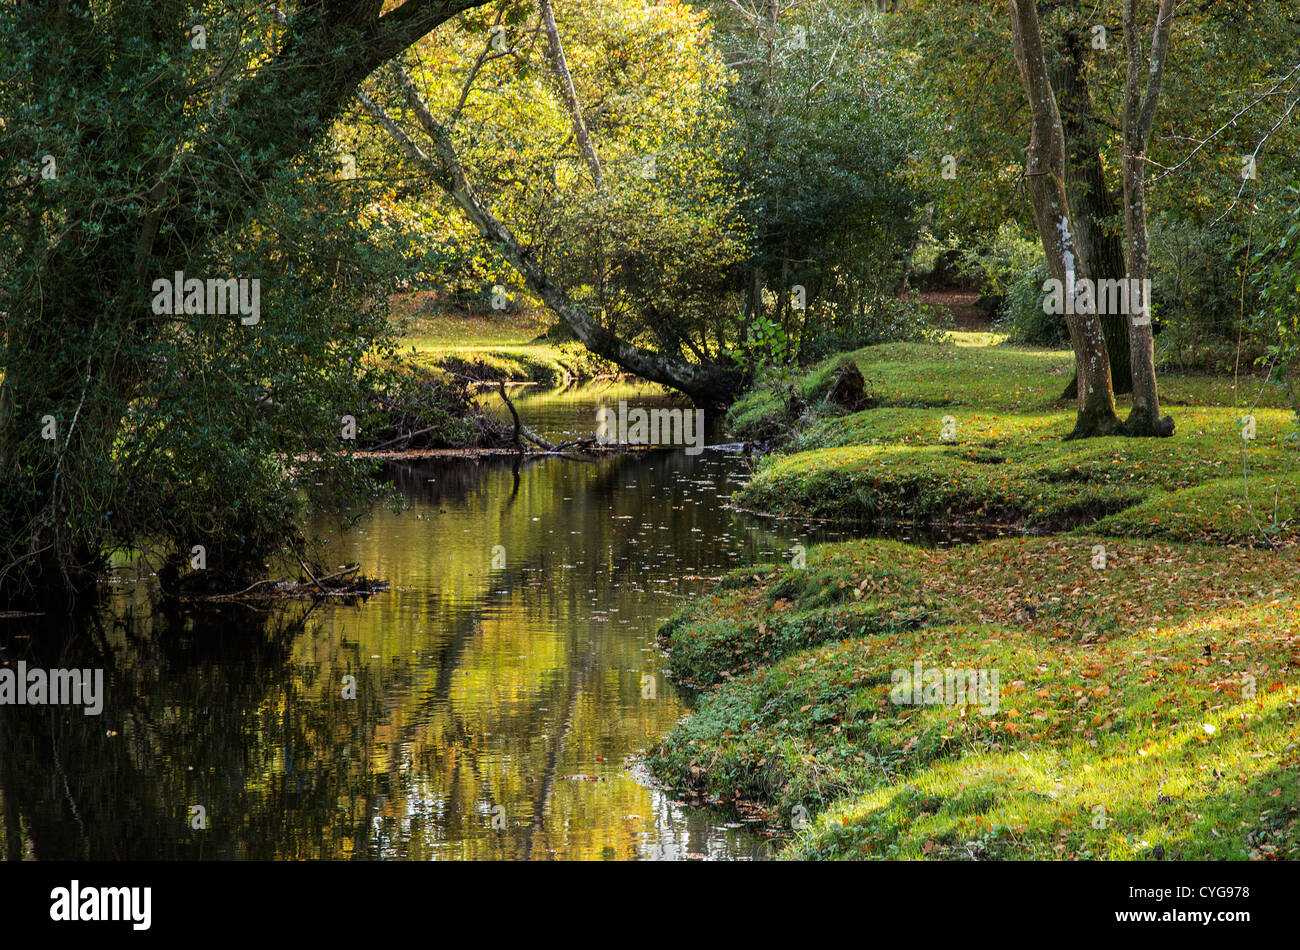 A New Forest landscape showing the banks of Beaulieu River with reflections of trees in the calm water, Hampshire. England, UK. Europe Stock Photo